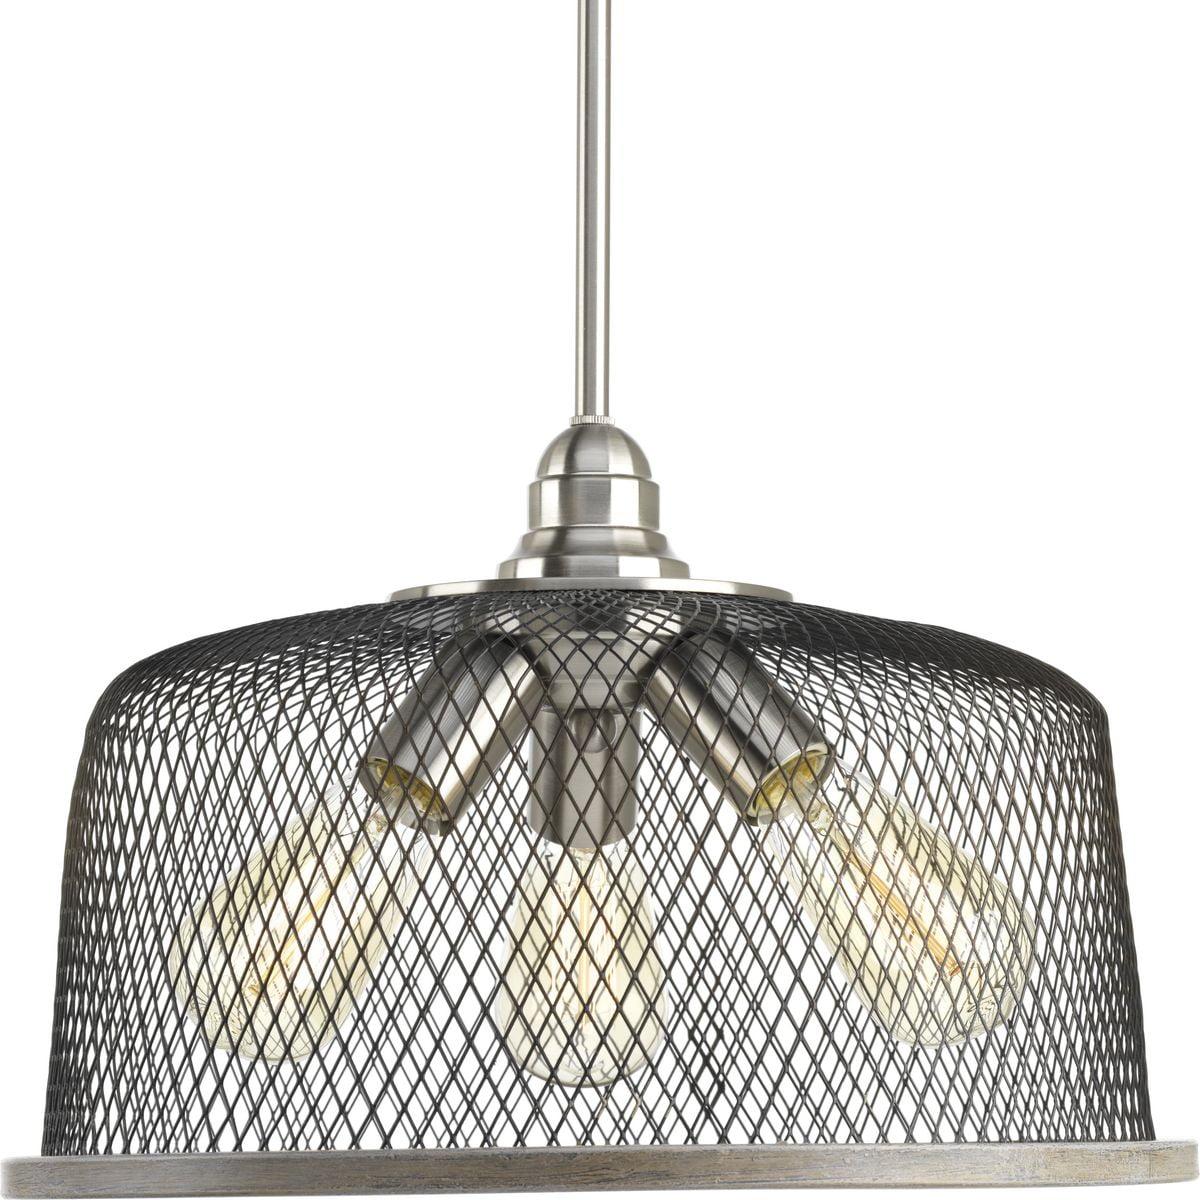 Tilley Brushed Nickel 16" Drum Pendant with Industrial Mesh Shades